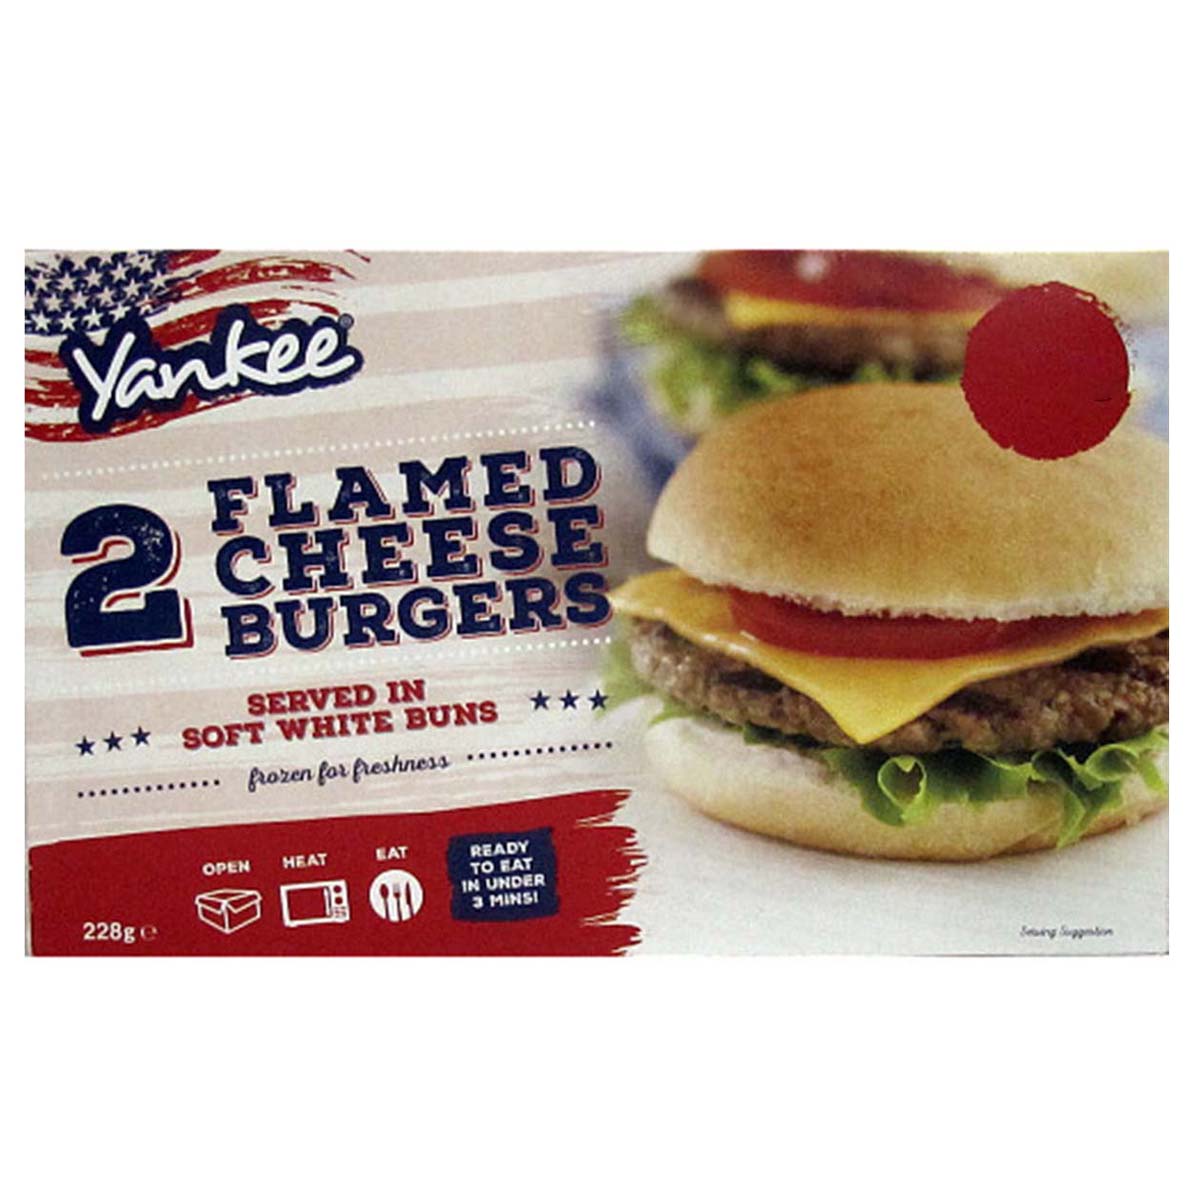 Yankee - 2 Flamed Cheese Burgers - 228g - Continental Food Store